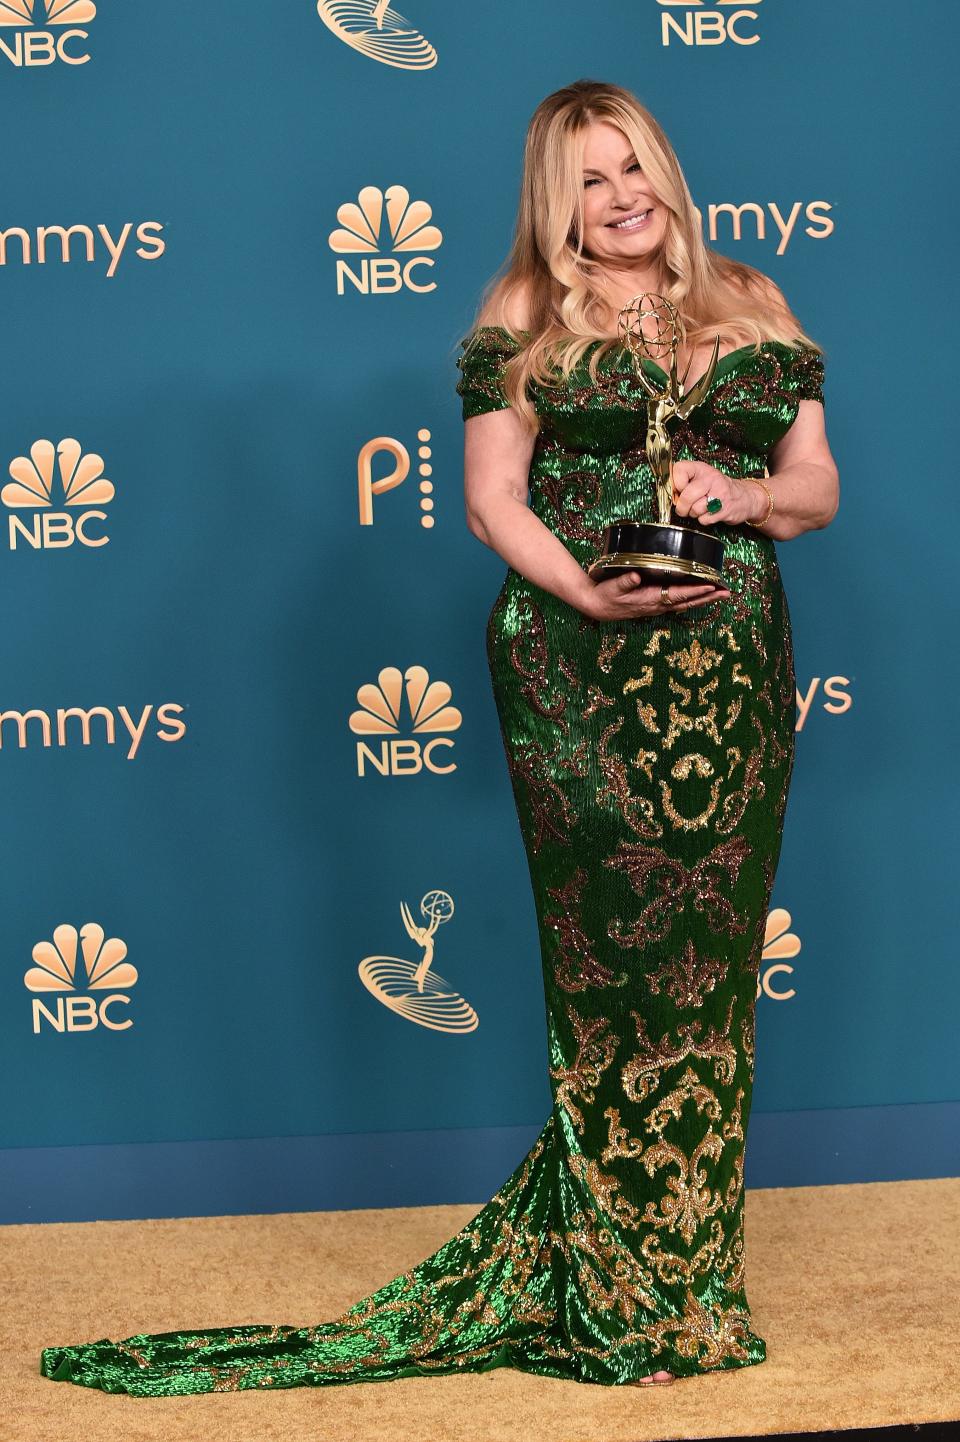 Jennifer Coolidge poses with the Emmy for outstanding supporting actress in a limited or anthology series or movie for "The White Lotus" during the 74th Emmy Awards on Monday, Sept. 12, 2022, at the Event Deck of the Microsoft Theater in Los Angeles.